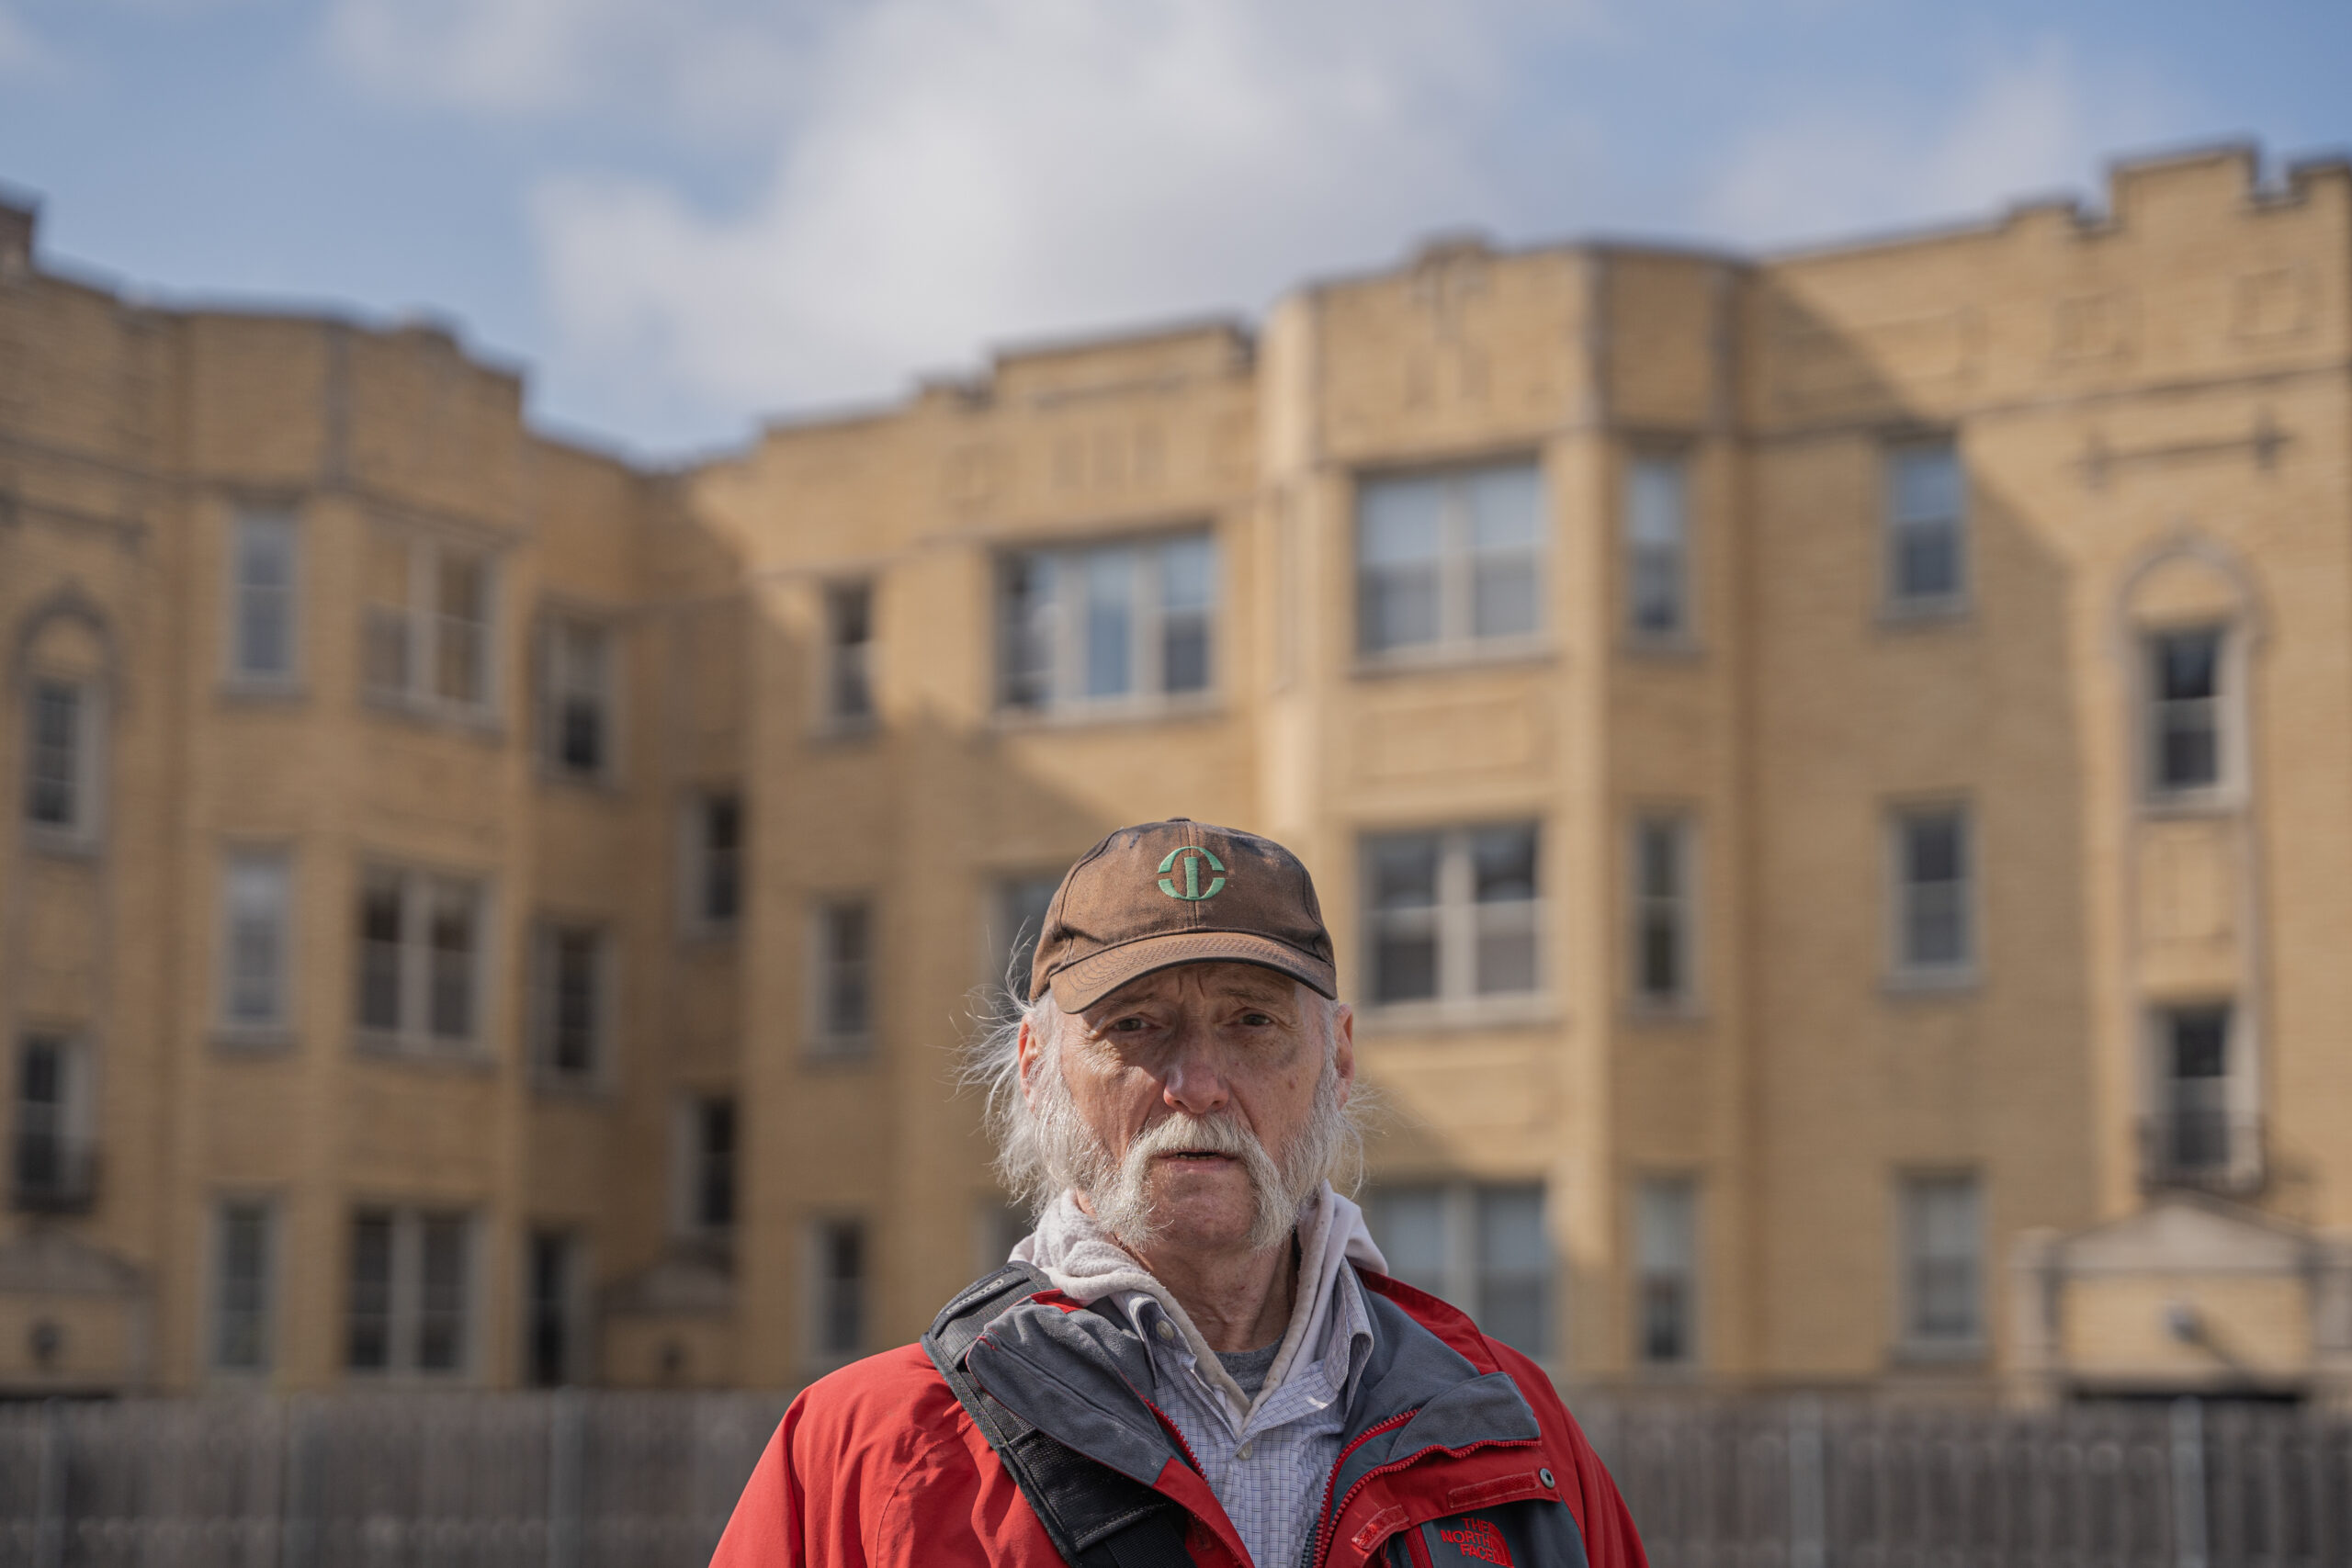 An older man with grey hair and a grey mustache stands outside in a red jacket and brown hat. There's a light brick building in the background.